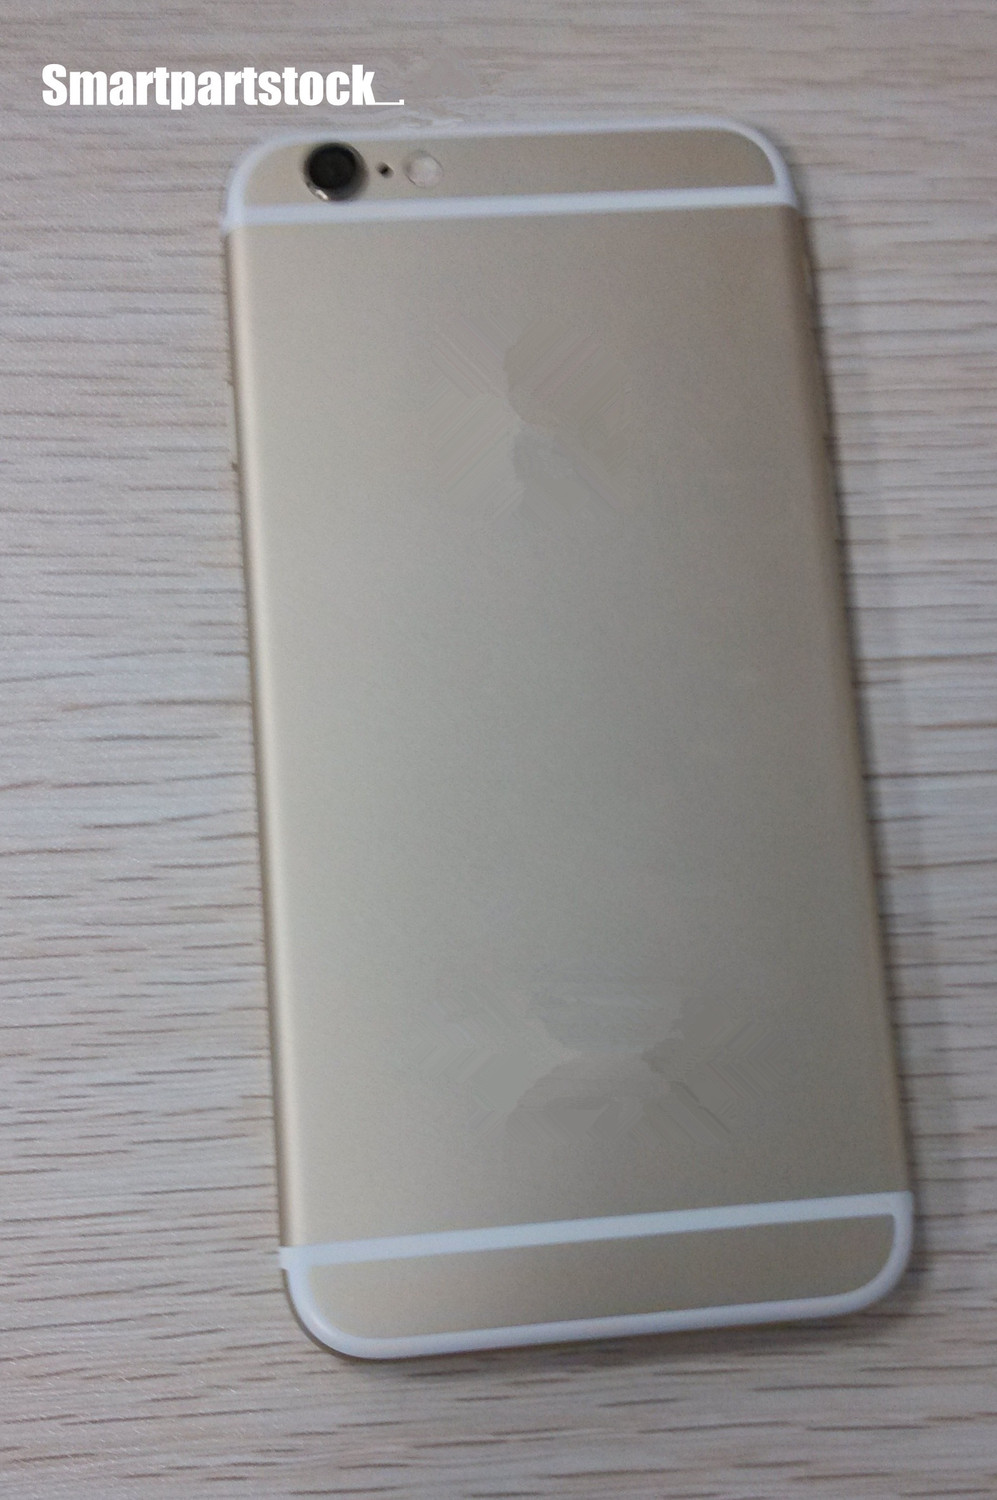 iPhone 6 back cover gold.jpg